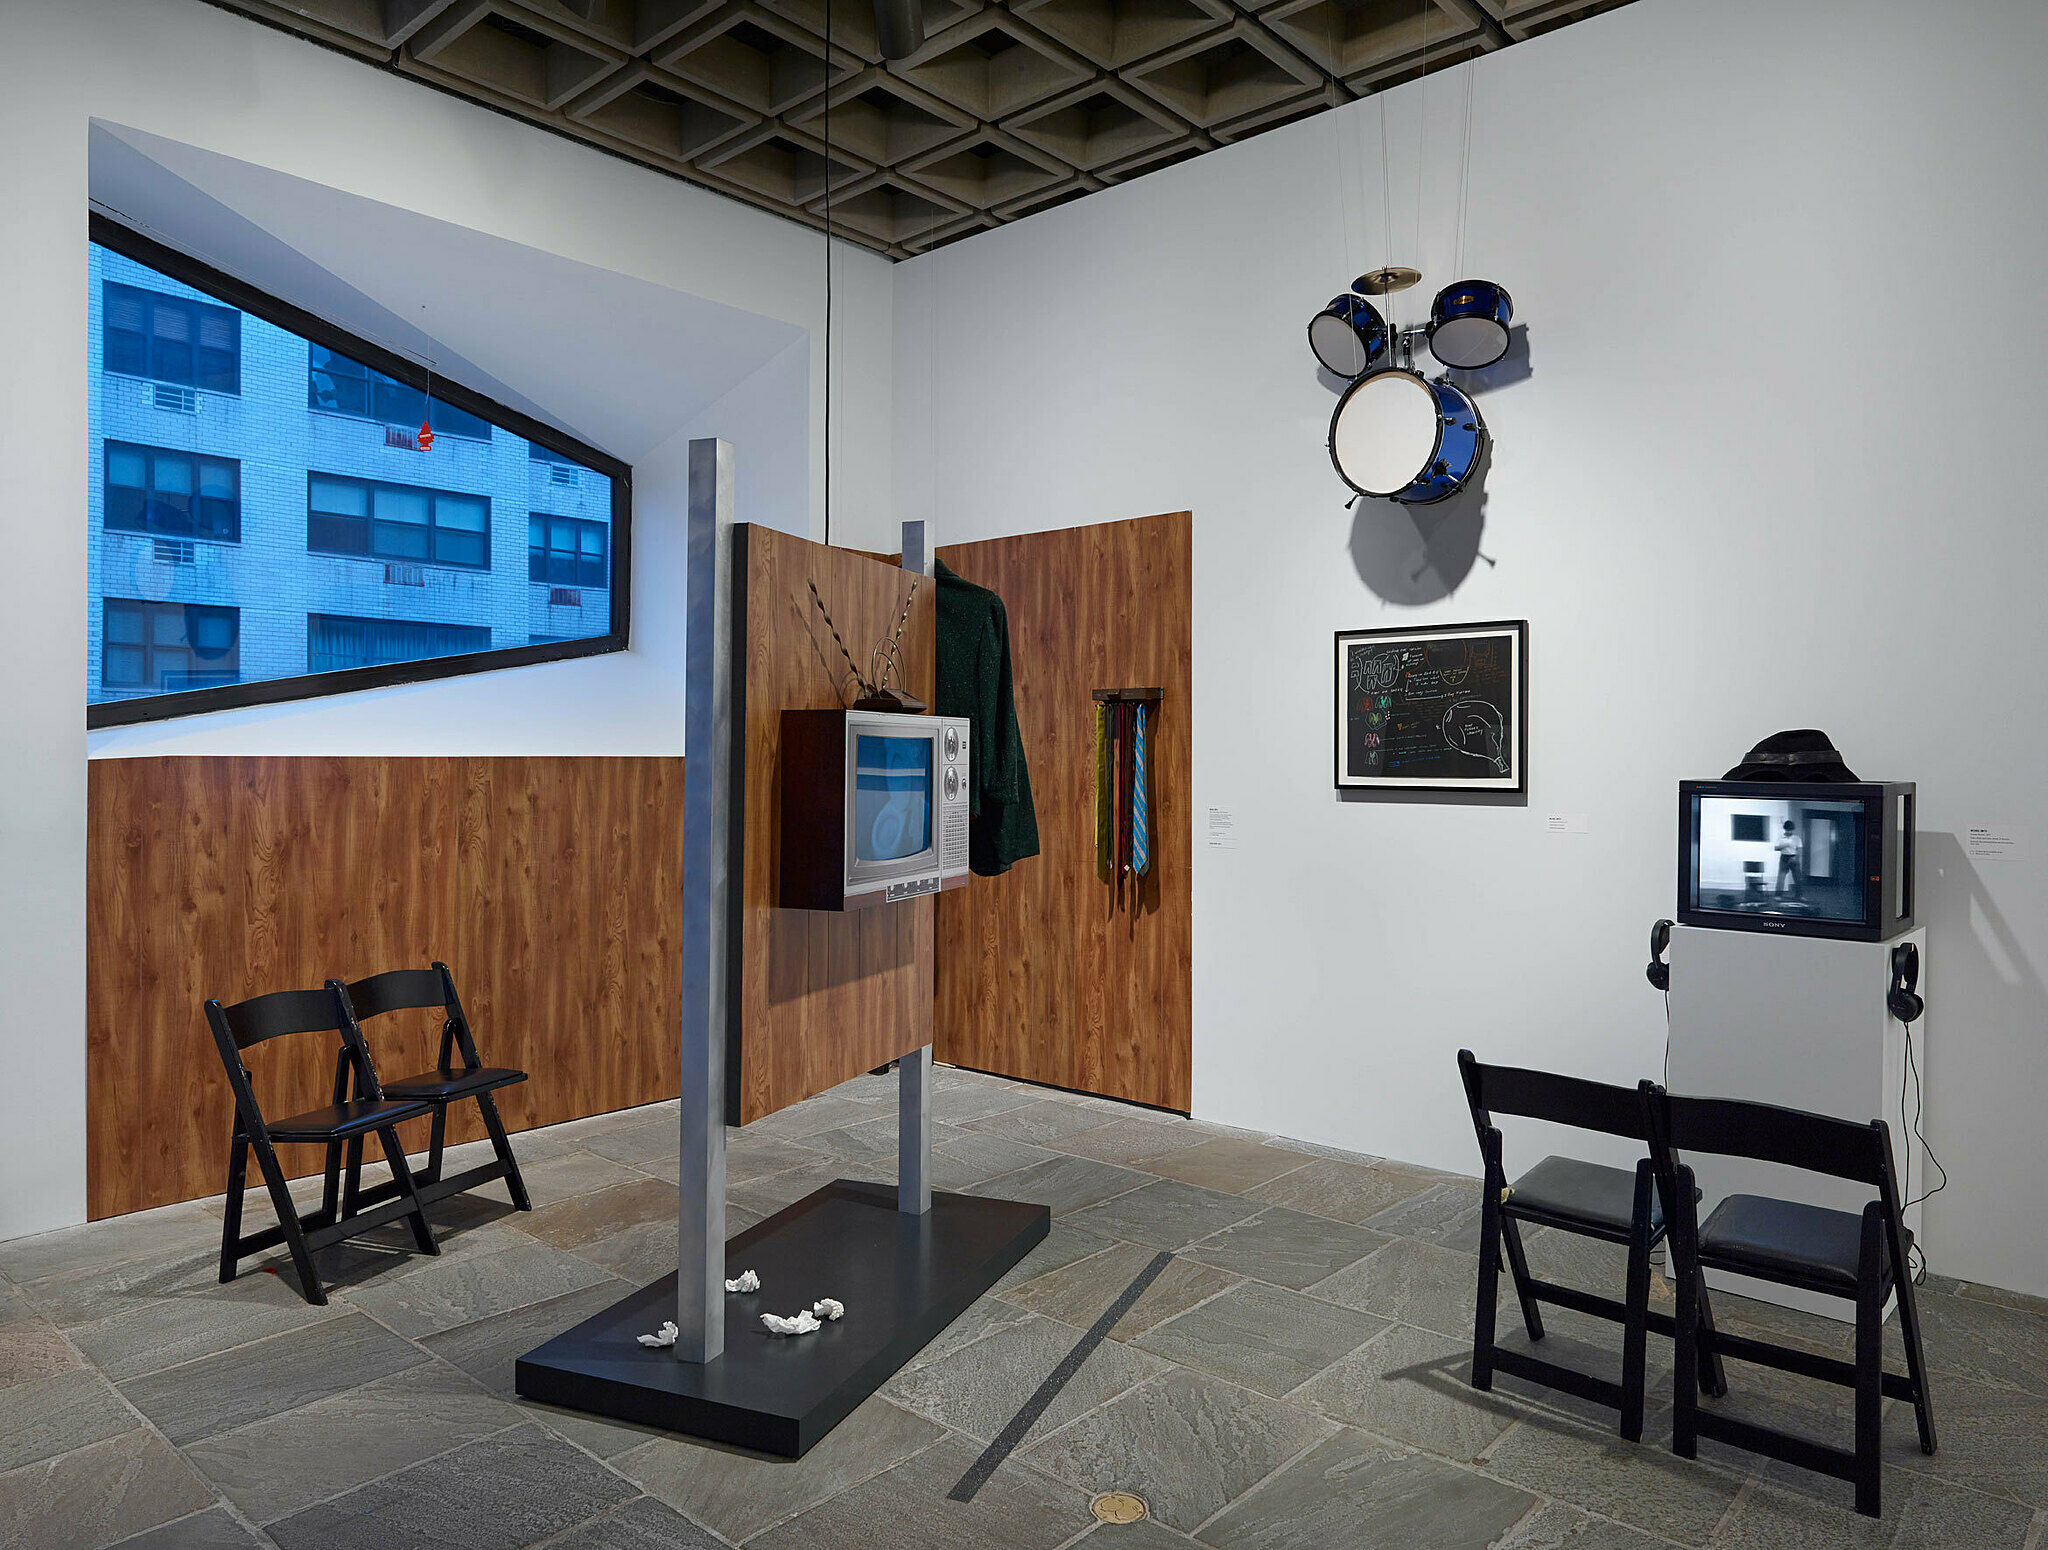 Art installation with two televisions drums hanging on the wall.